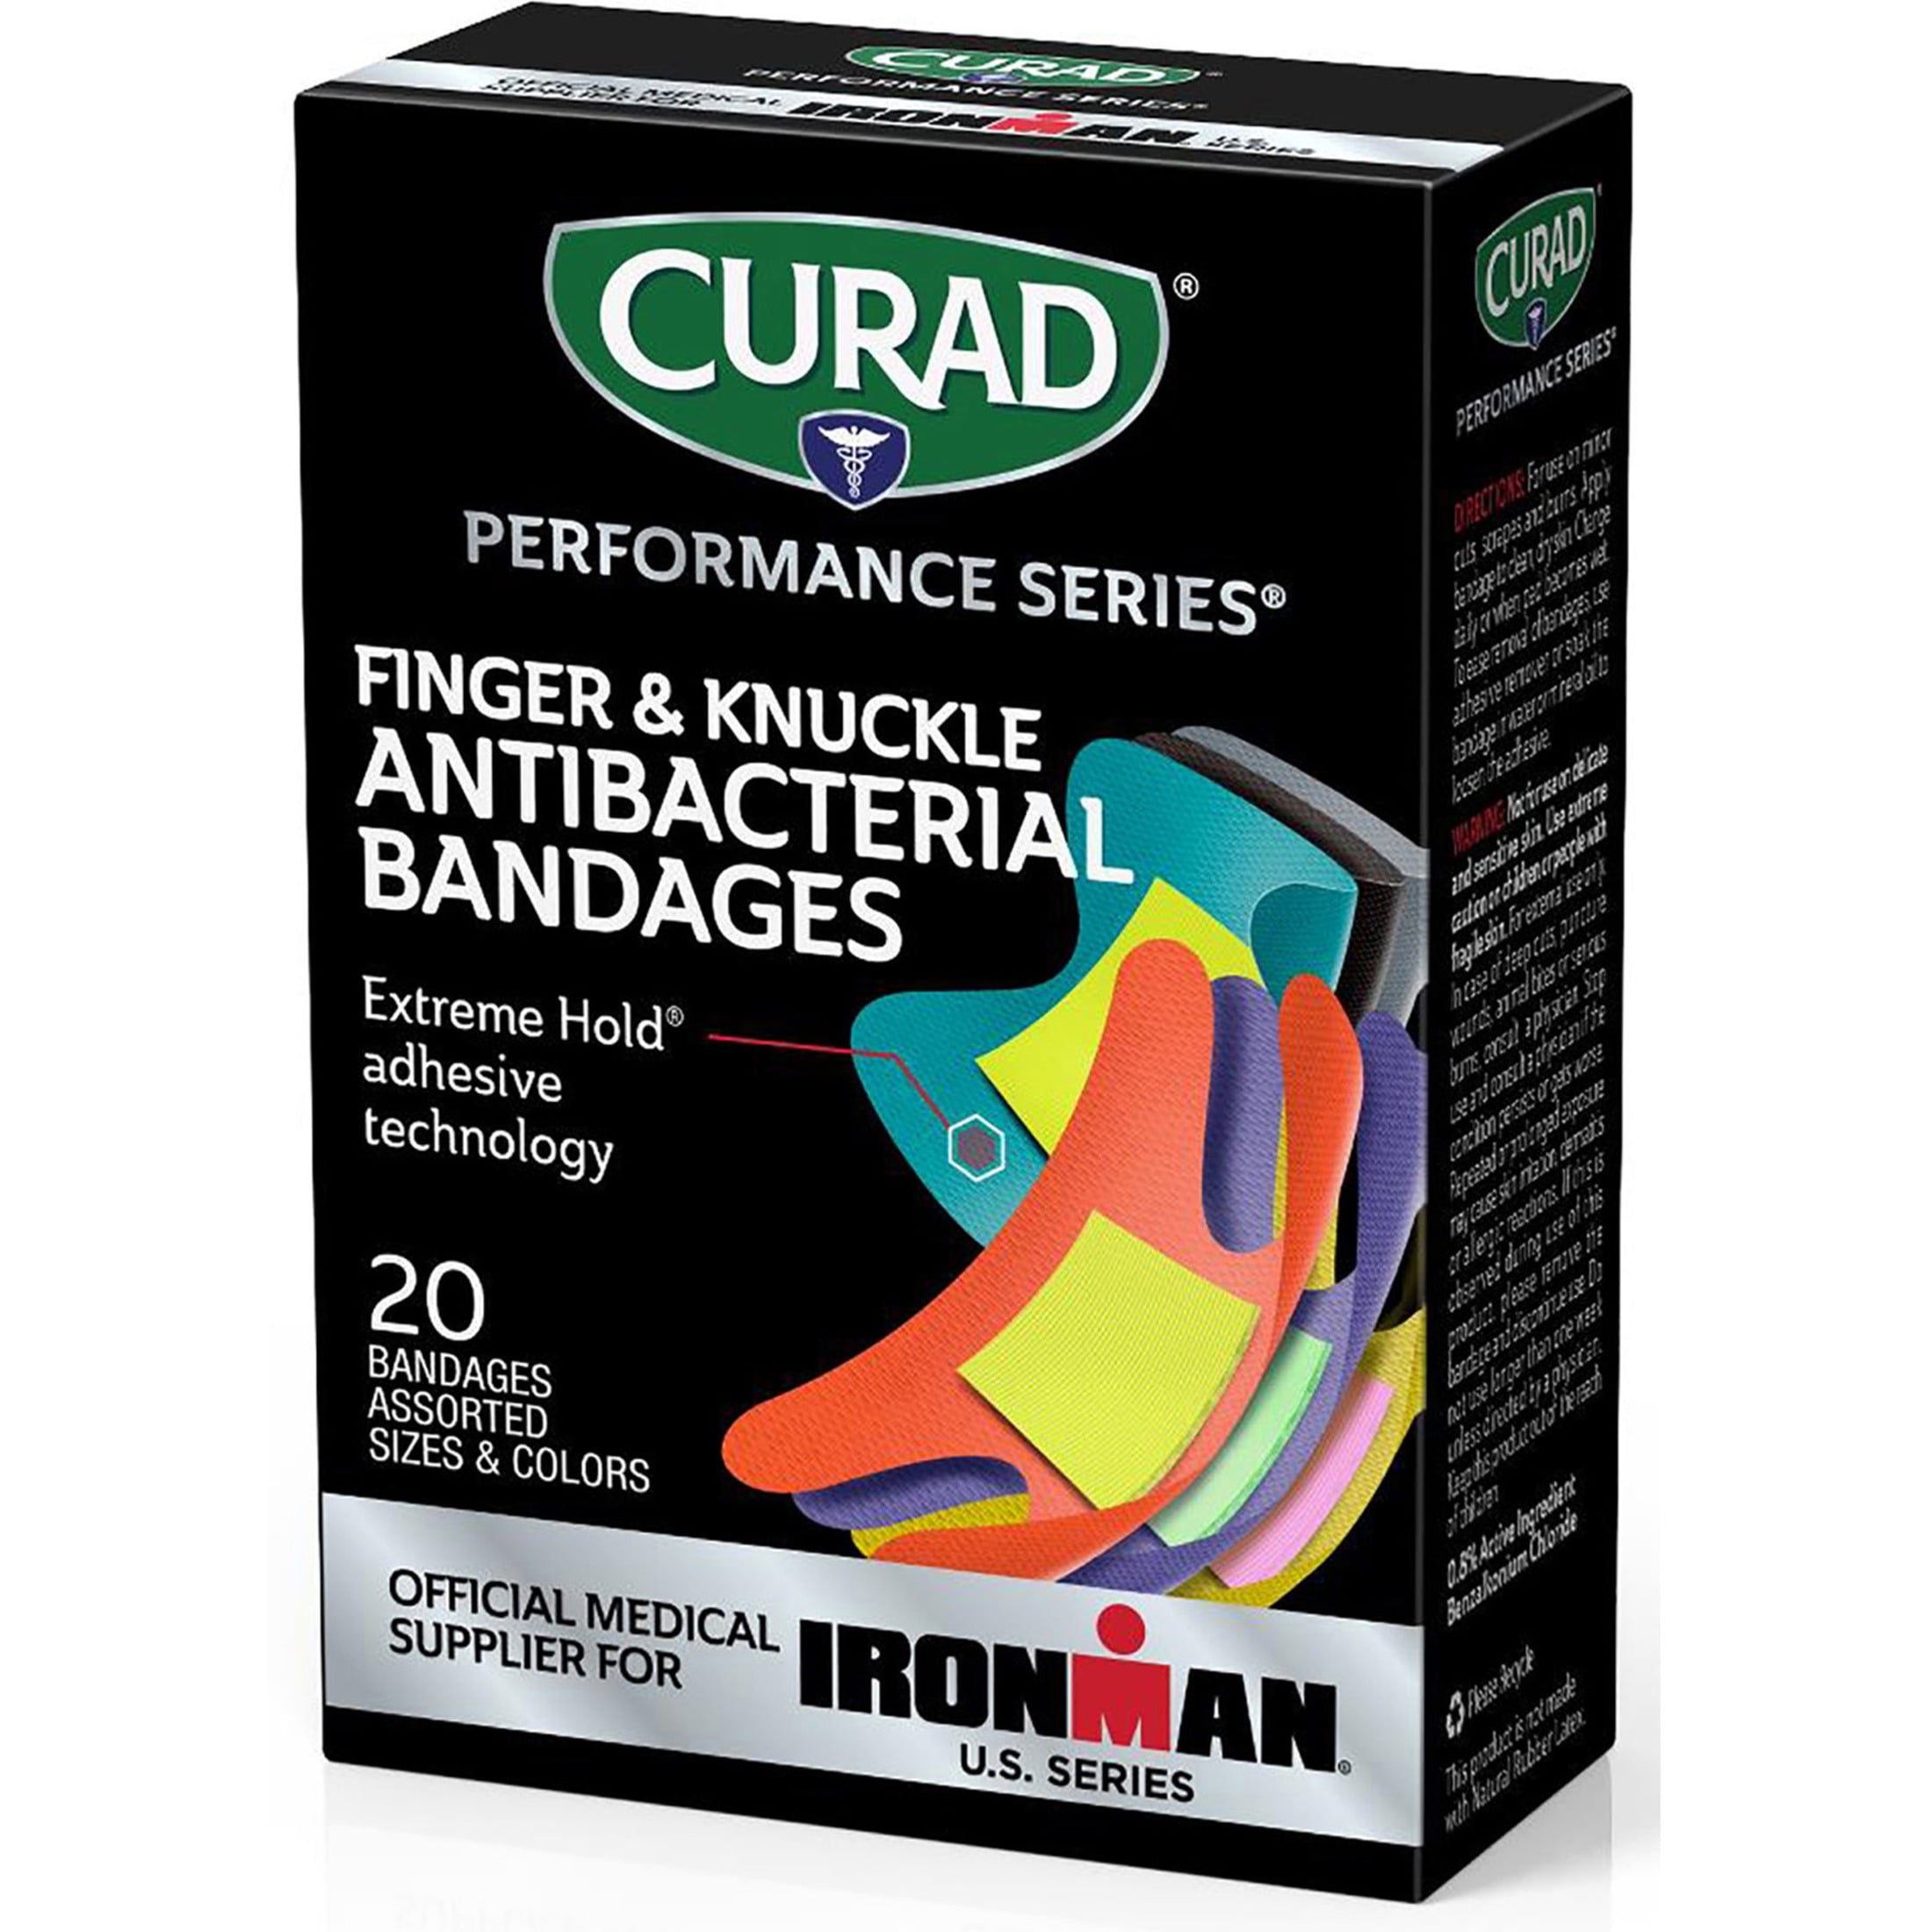 Curad Performance Series Ironman Fingertip and Knuckle Antibacterial Bandages, Extreme Hold Adhesive Technology, Fabric Bandages, 20 ct (Pack of 1)